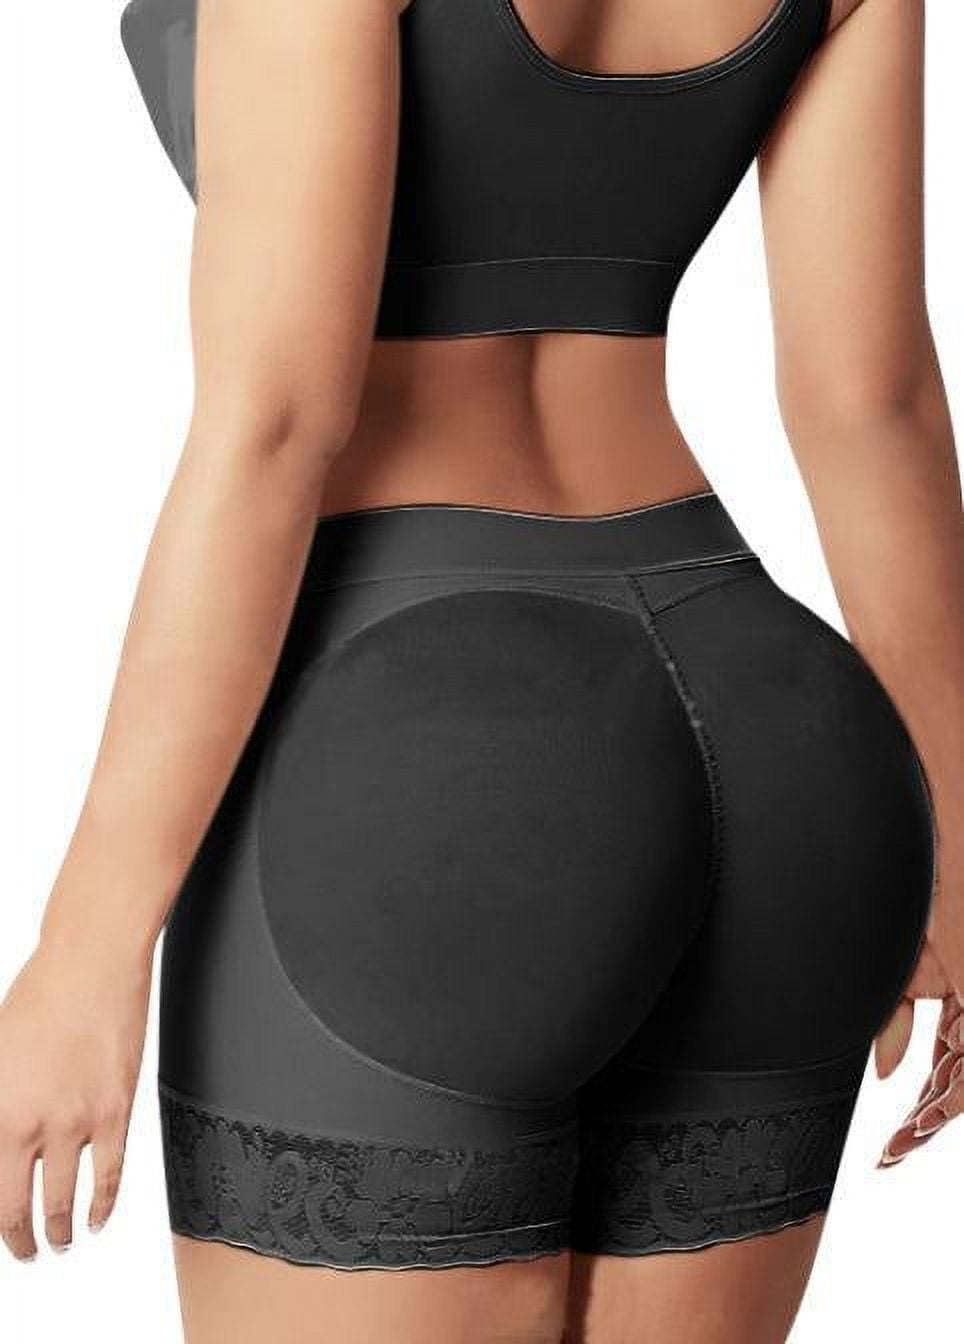 Everbellus Seamless Butt Lifter Shorts Padded Panties Enhancer Womens  Underwear Beige S at Amazon Women's Clothing store